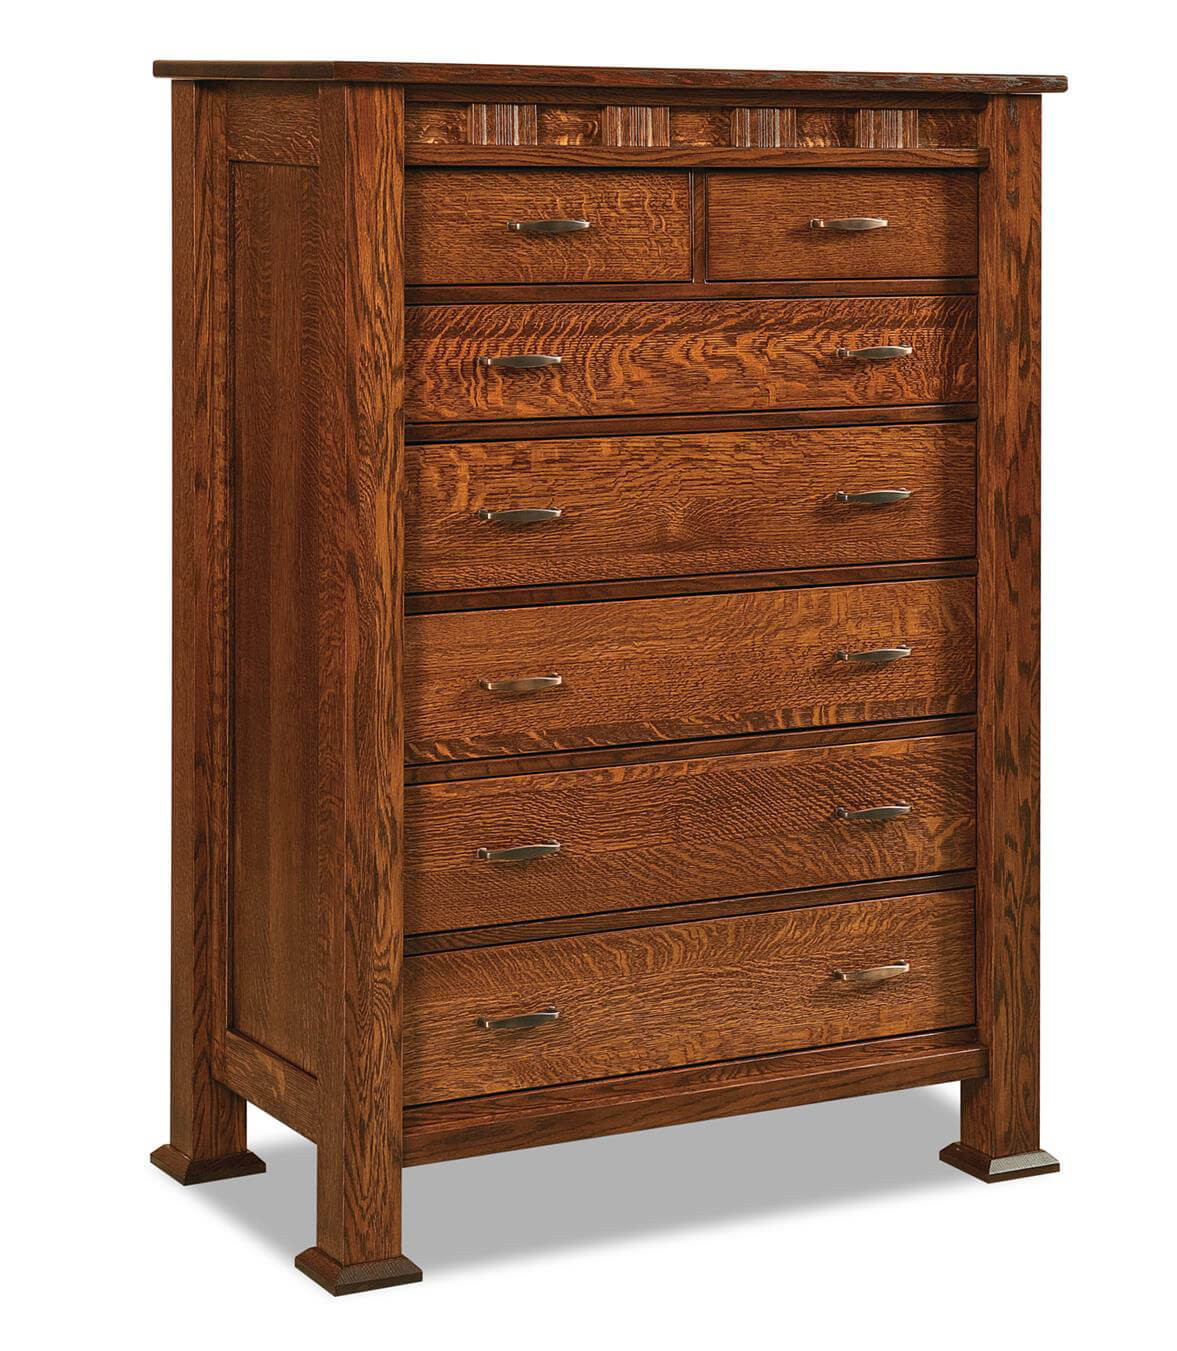 Tuskegee Chest of Drawers